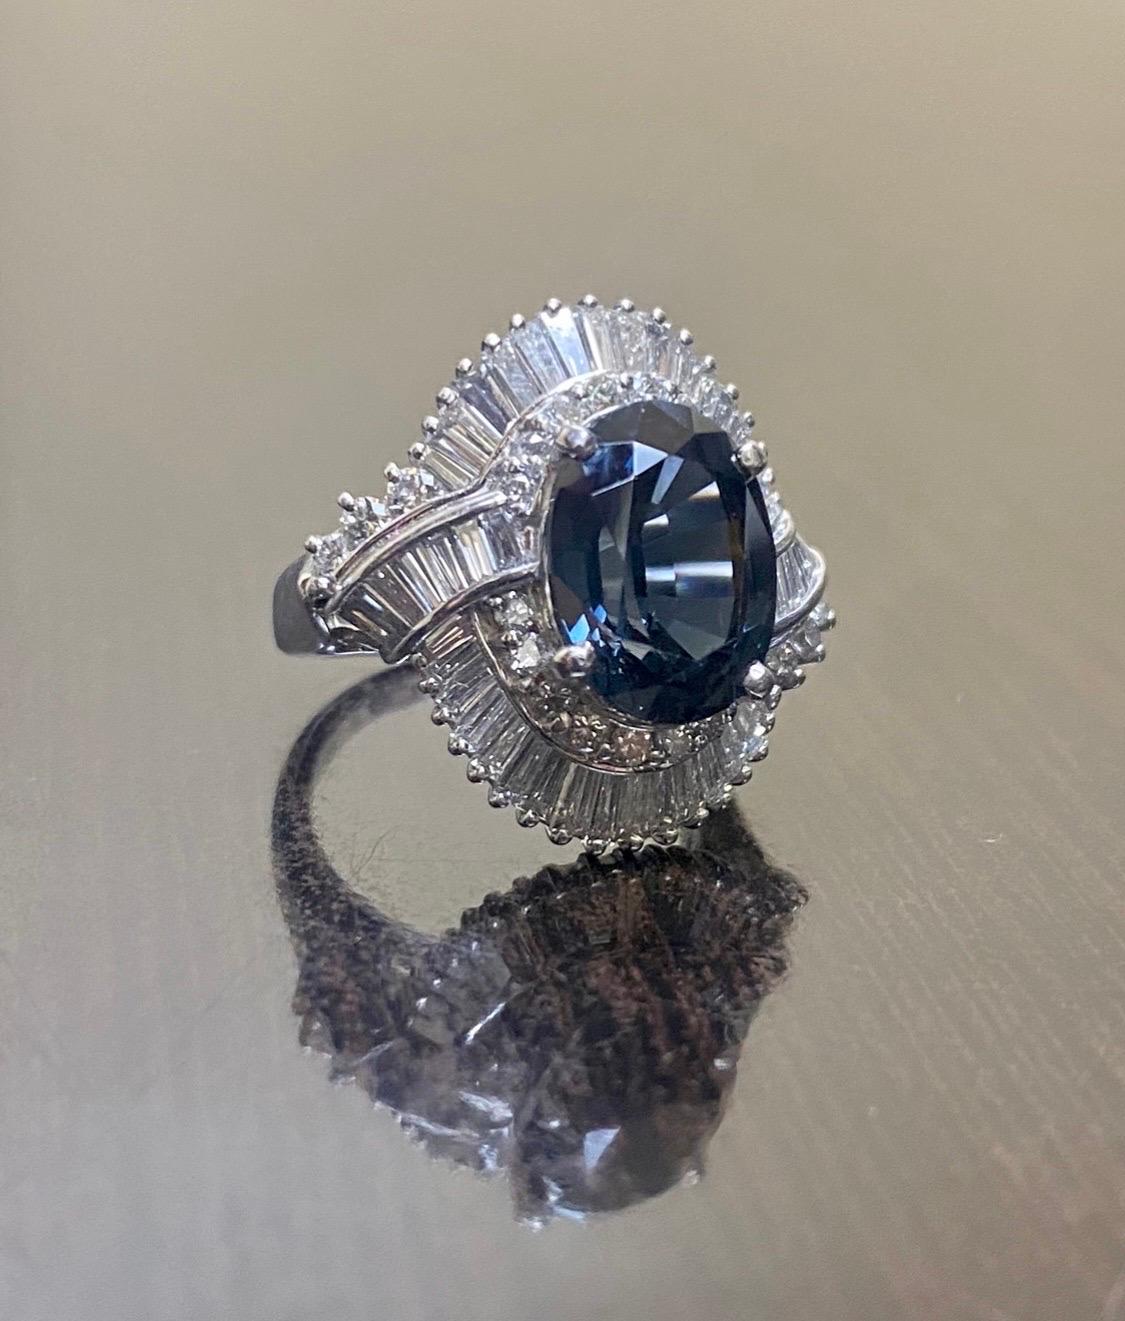 Dekara Designs Collection

Metal- 90% Platinum, 10% Iridium.

Stones- 1 Genuine Oval Blue Spinel 5.04 Carats, 48 Tapered Baguette Diamonds, 24 Round Diamonds G-H Color SI1 Clarity 1.96 Carats. 7 Carats Total Weight.

Size- 6. FREE SIZING!!!!

A